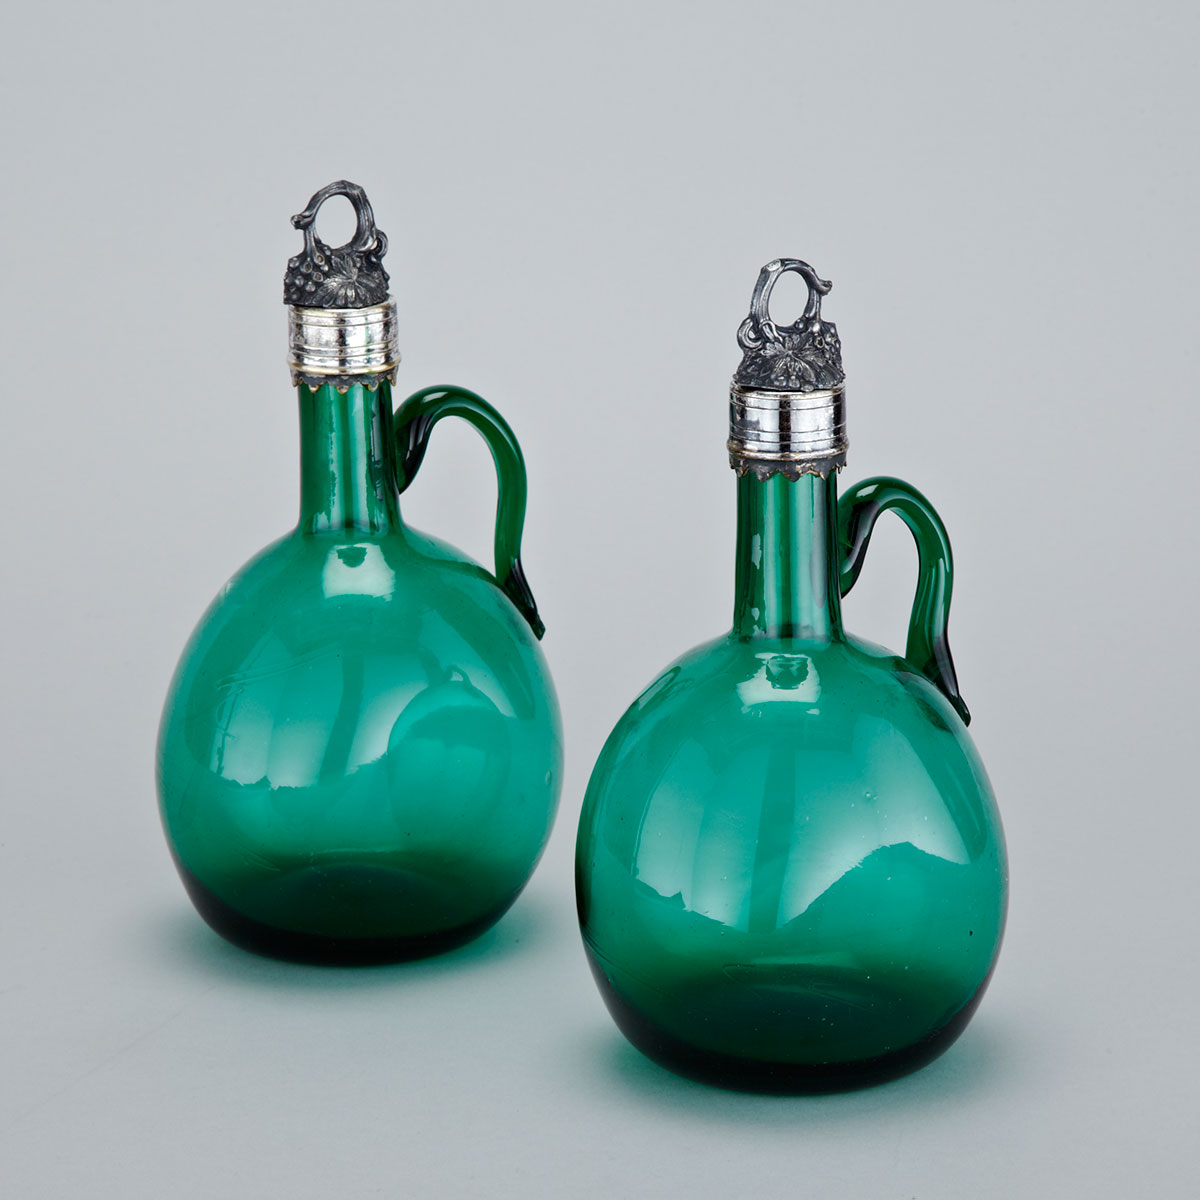 Pair of Bristol Green Glass Decanters, early 19th century